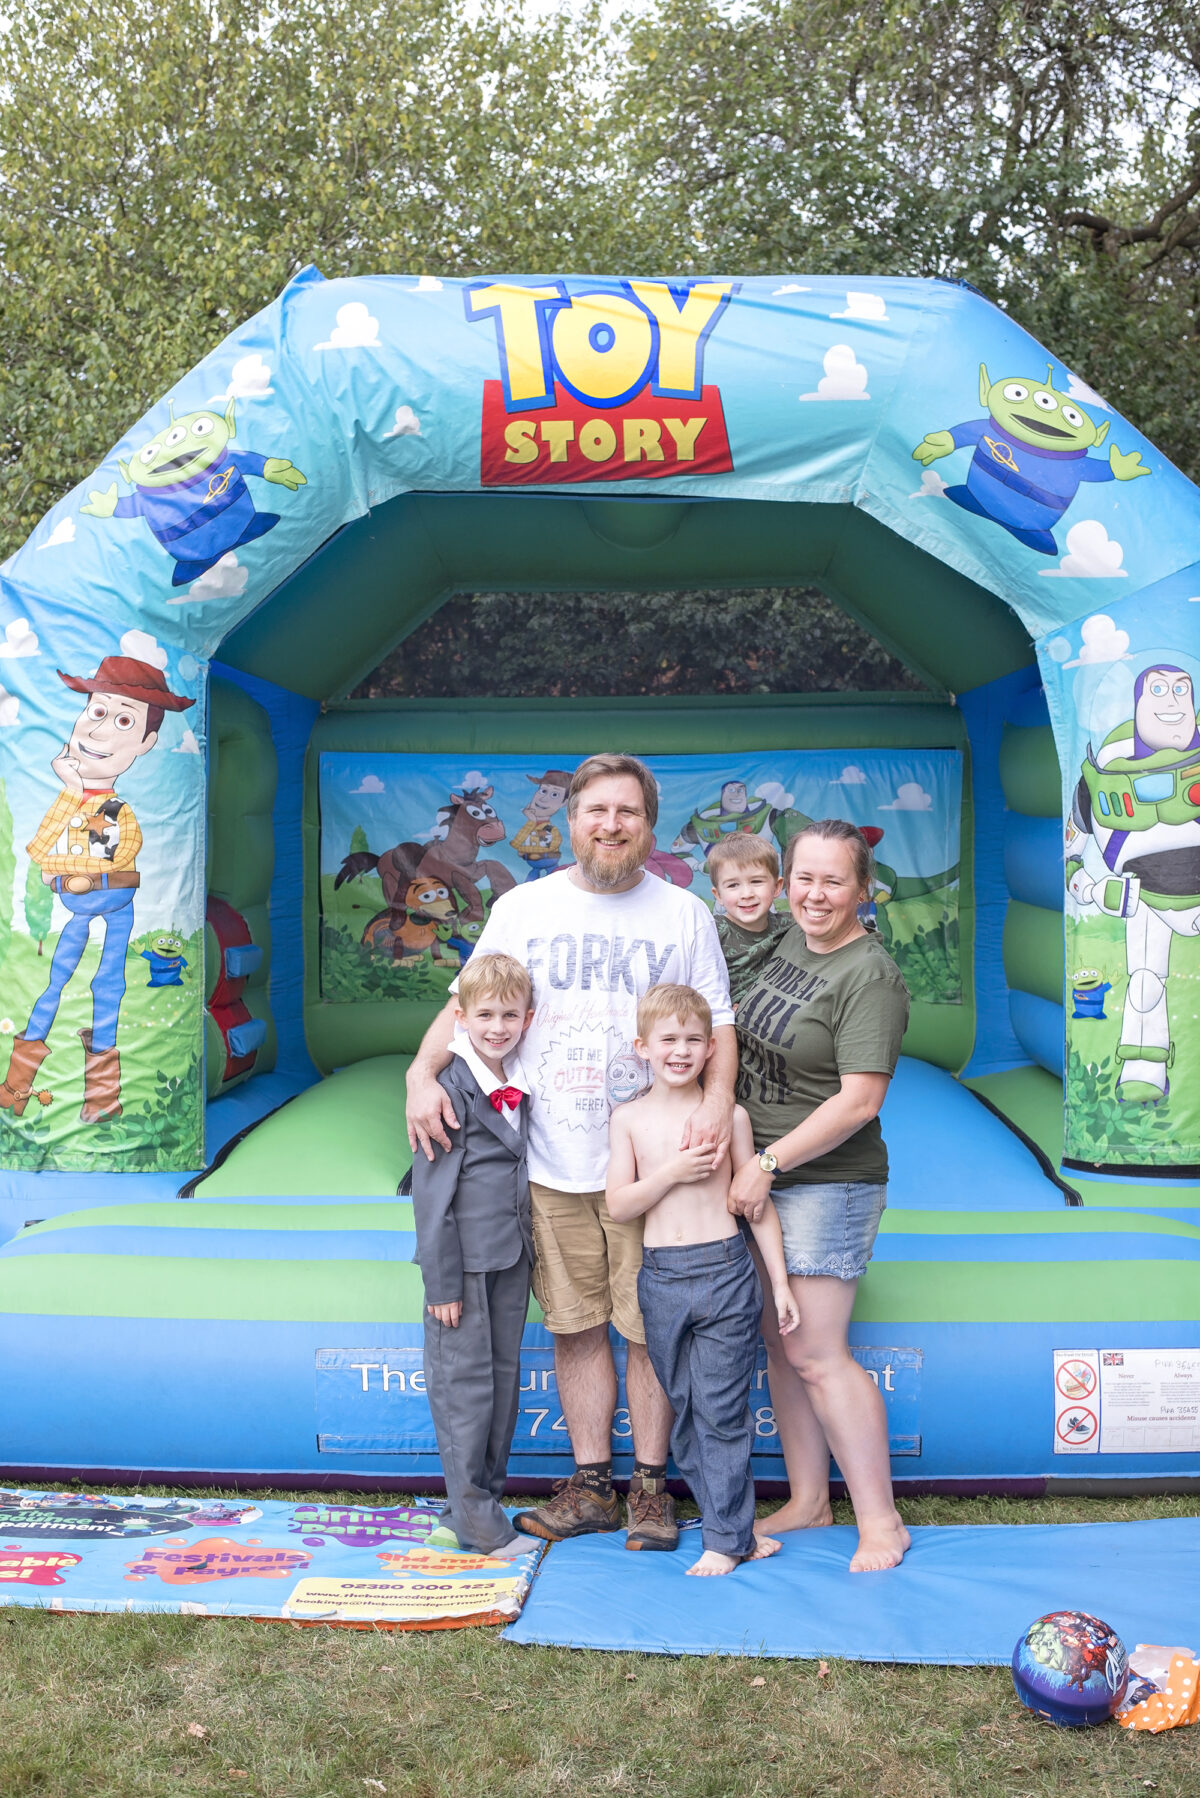 Image shows a toy story inflatable castle and a the Jones family stood next to it.